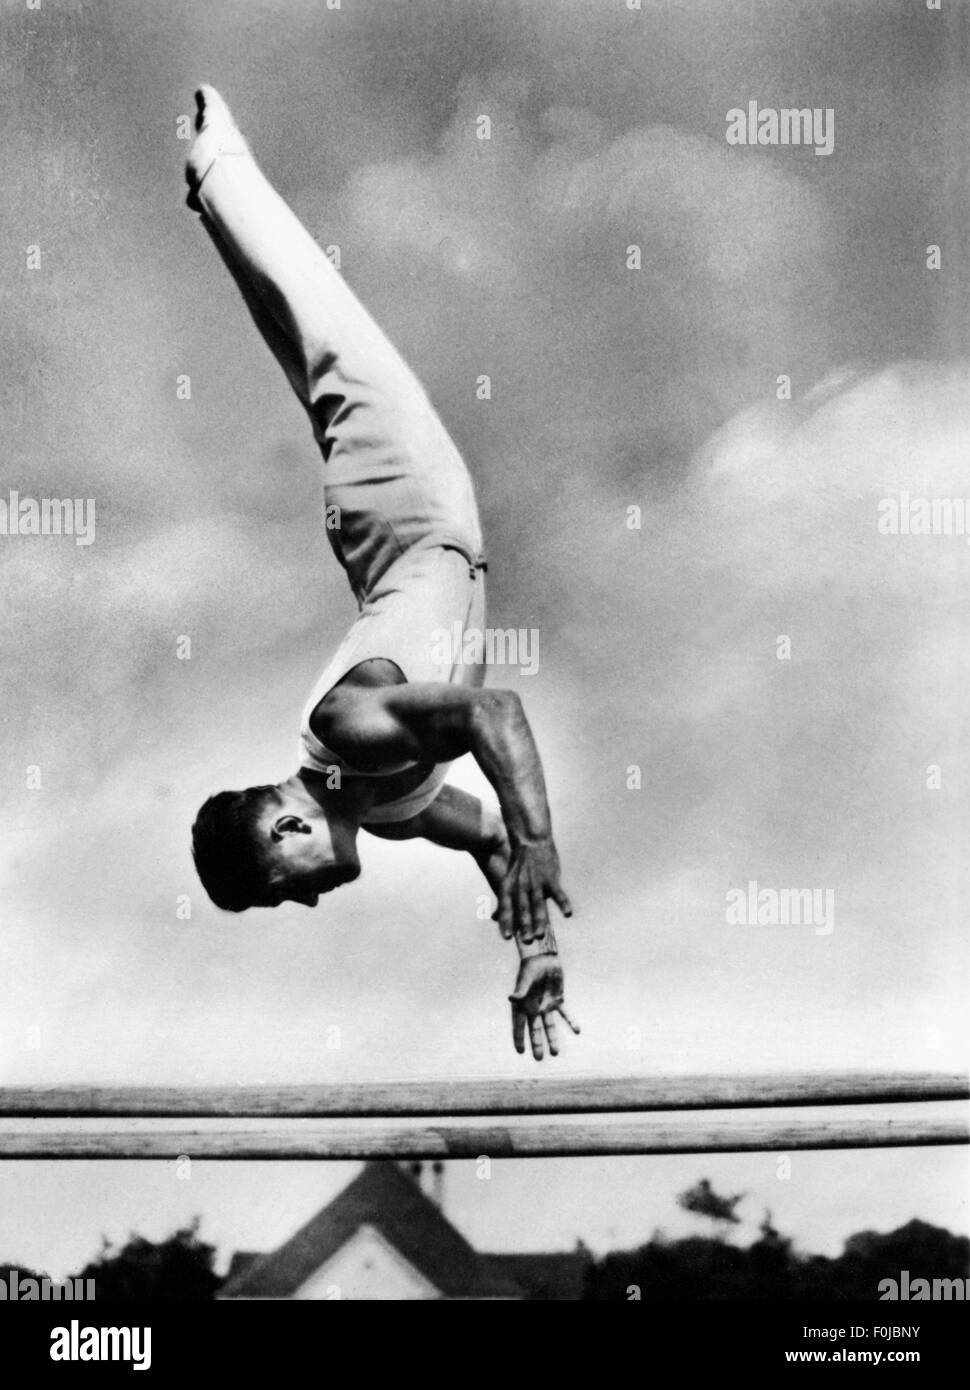 sports, Olympic Games, Berlin 1936, Additional-Rights-Clearences-Not Available Stock Photo